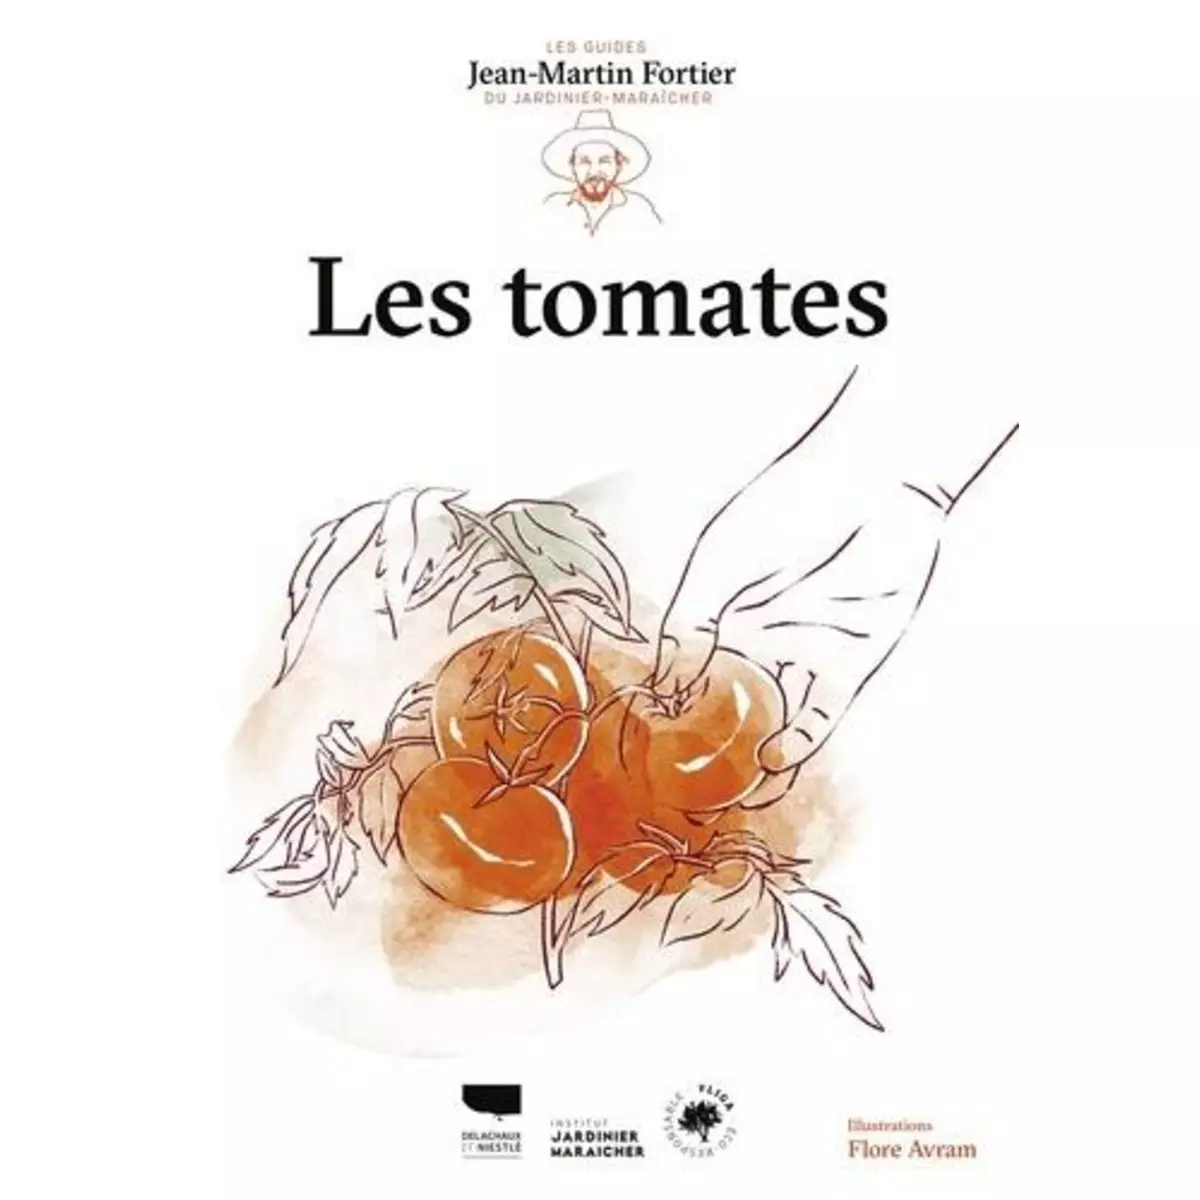  LES TOMATES, Fortier Jean-Martin